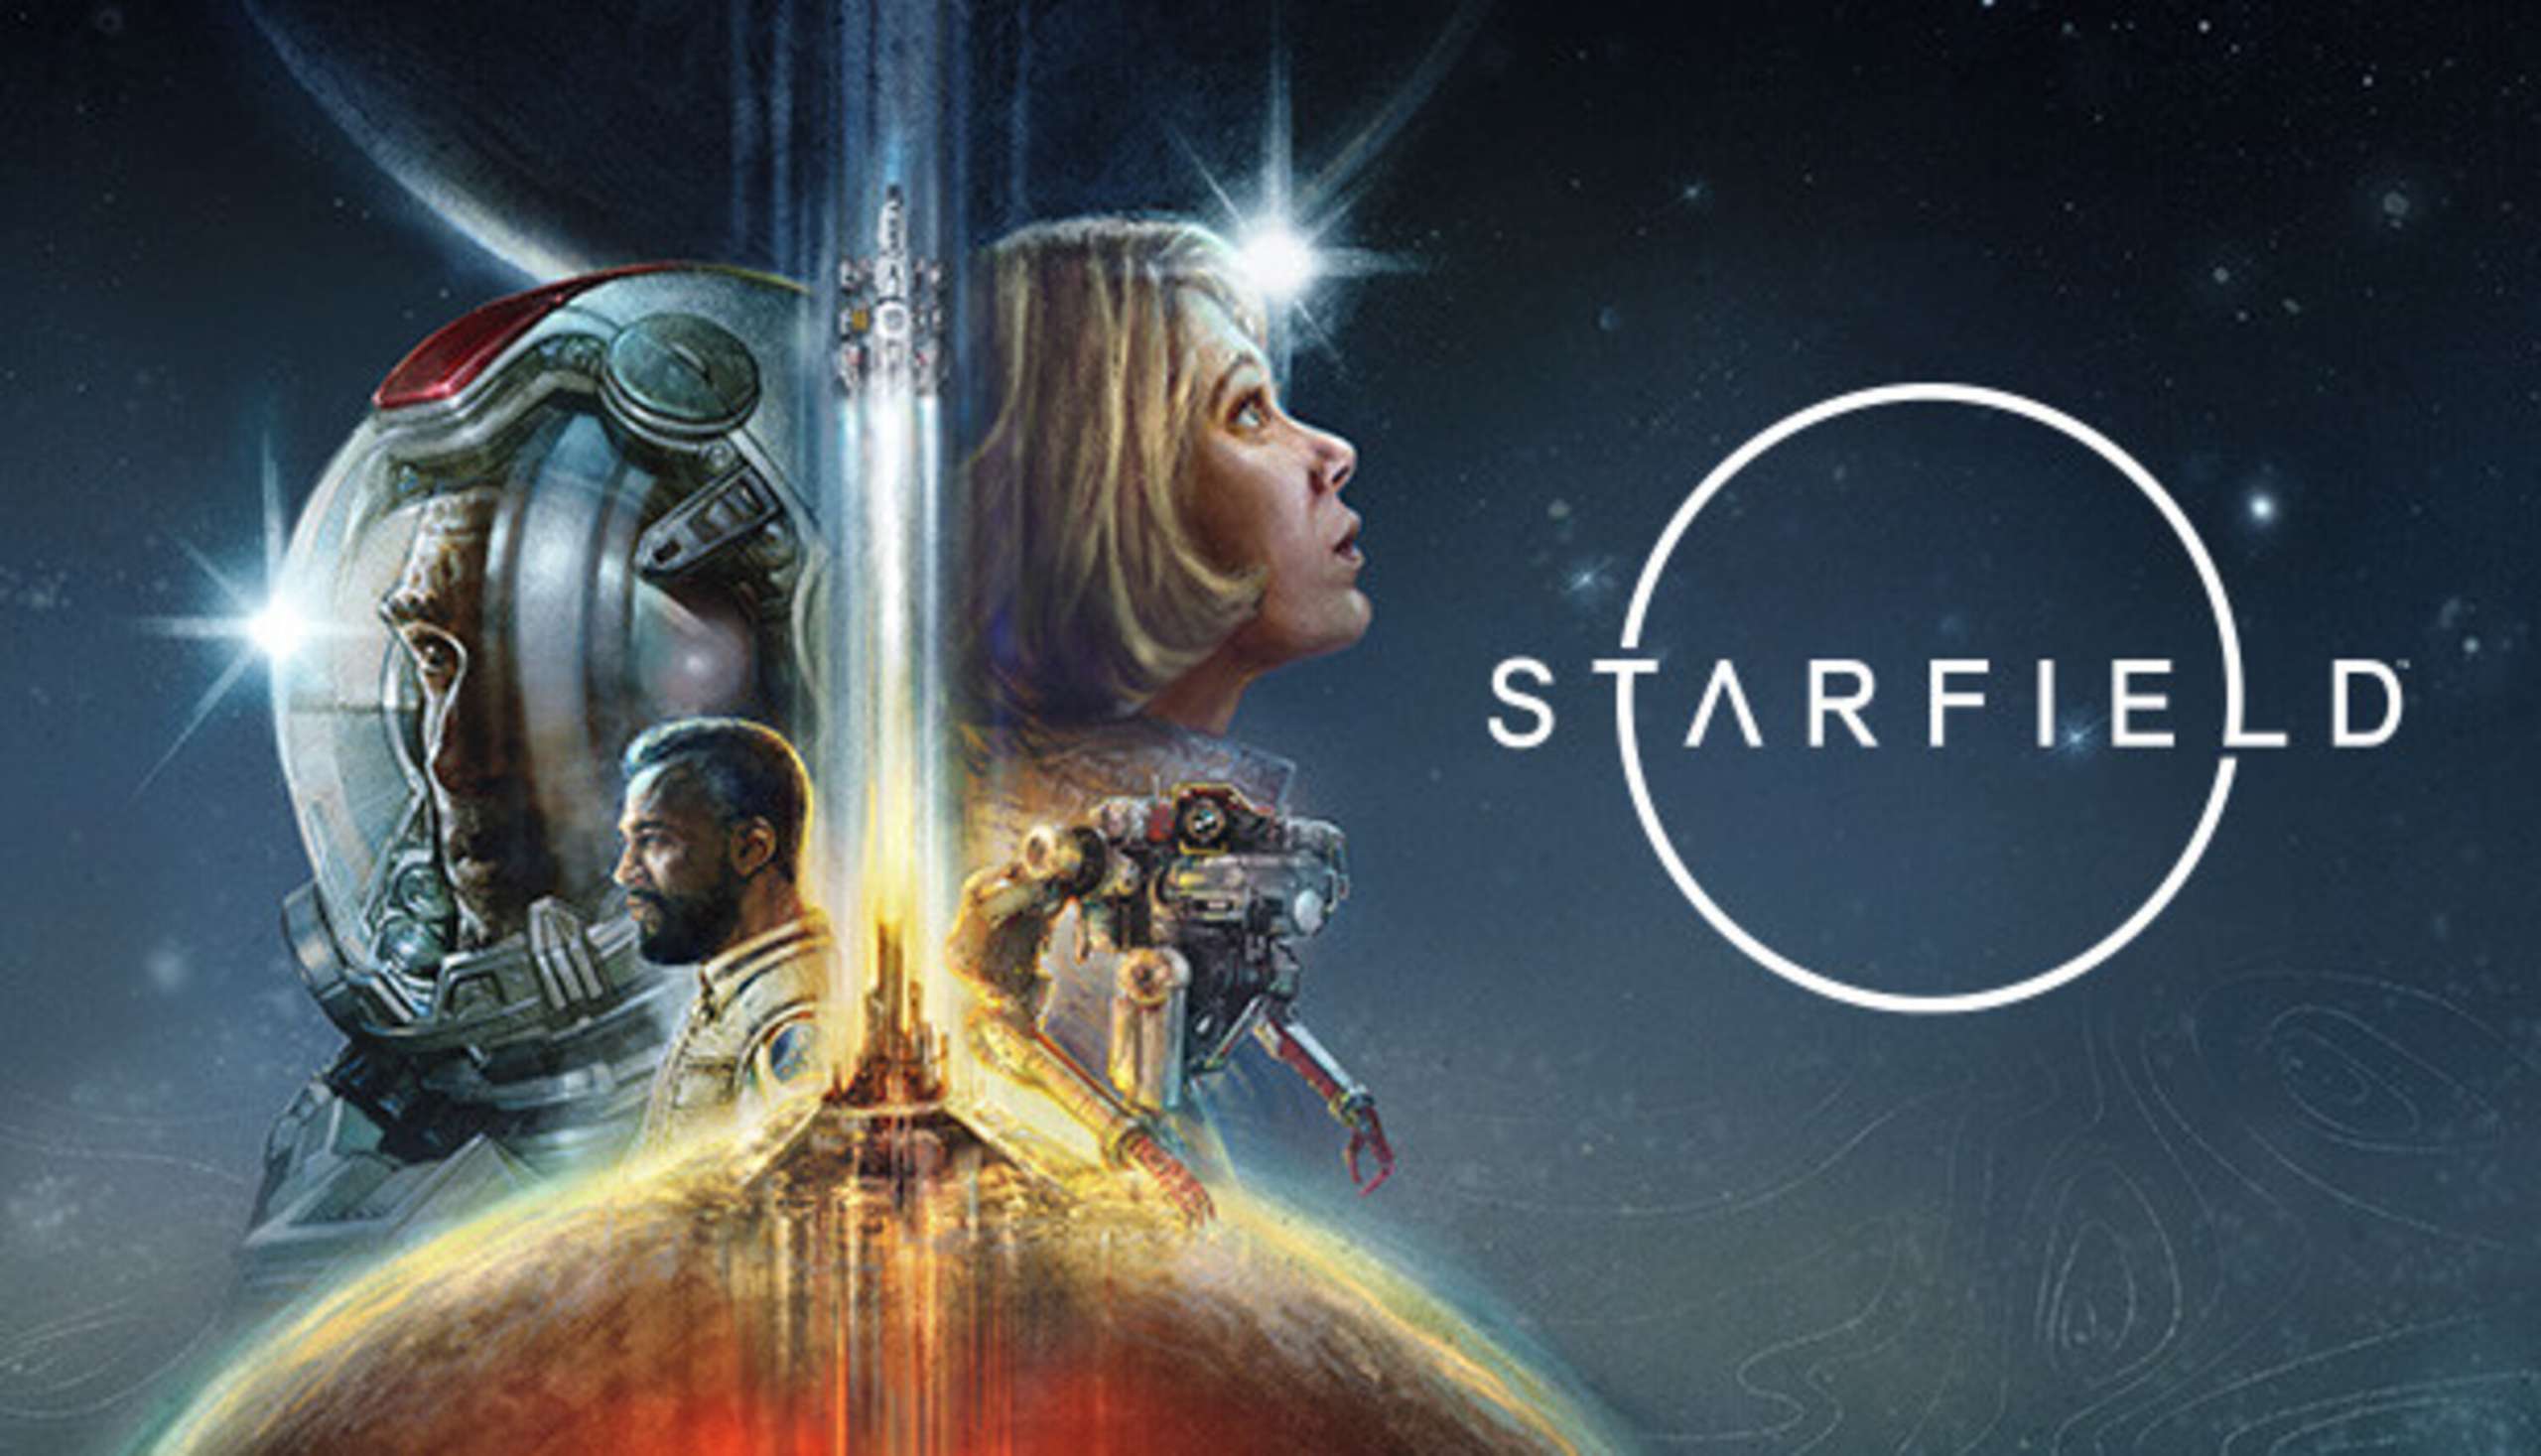 Starfield Will Attend Gamescom, But There Won’t Be Any New Gameplay